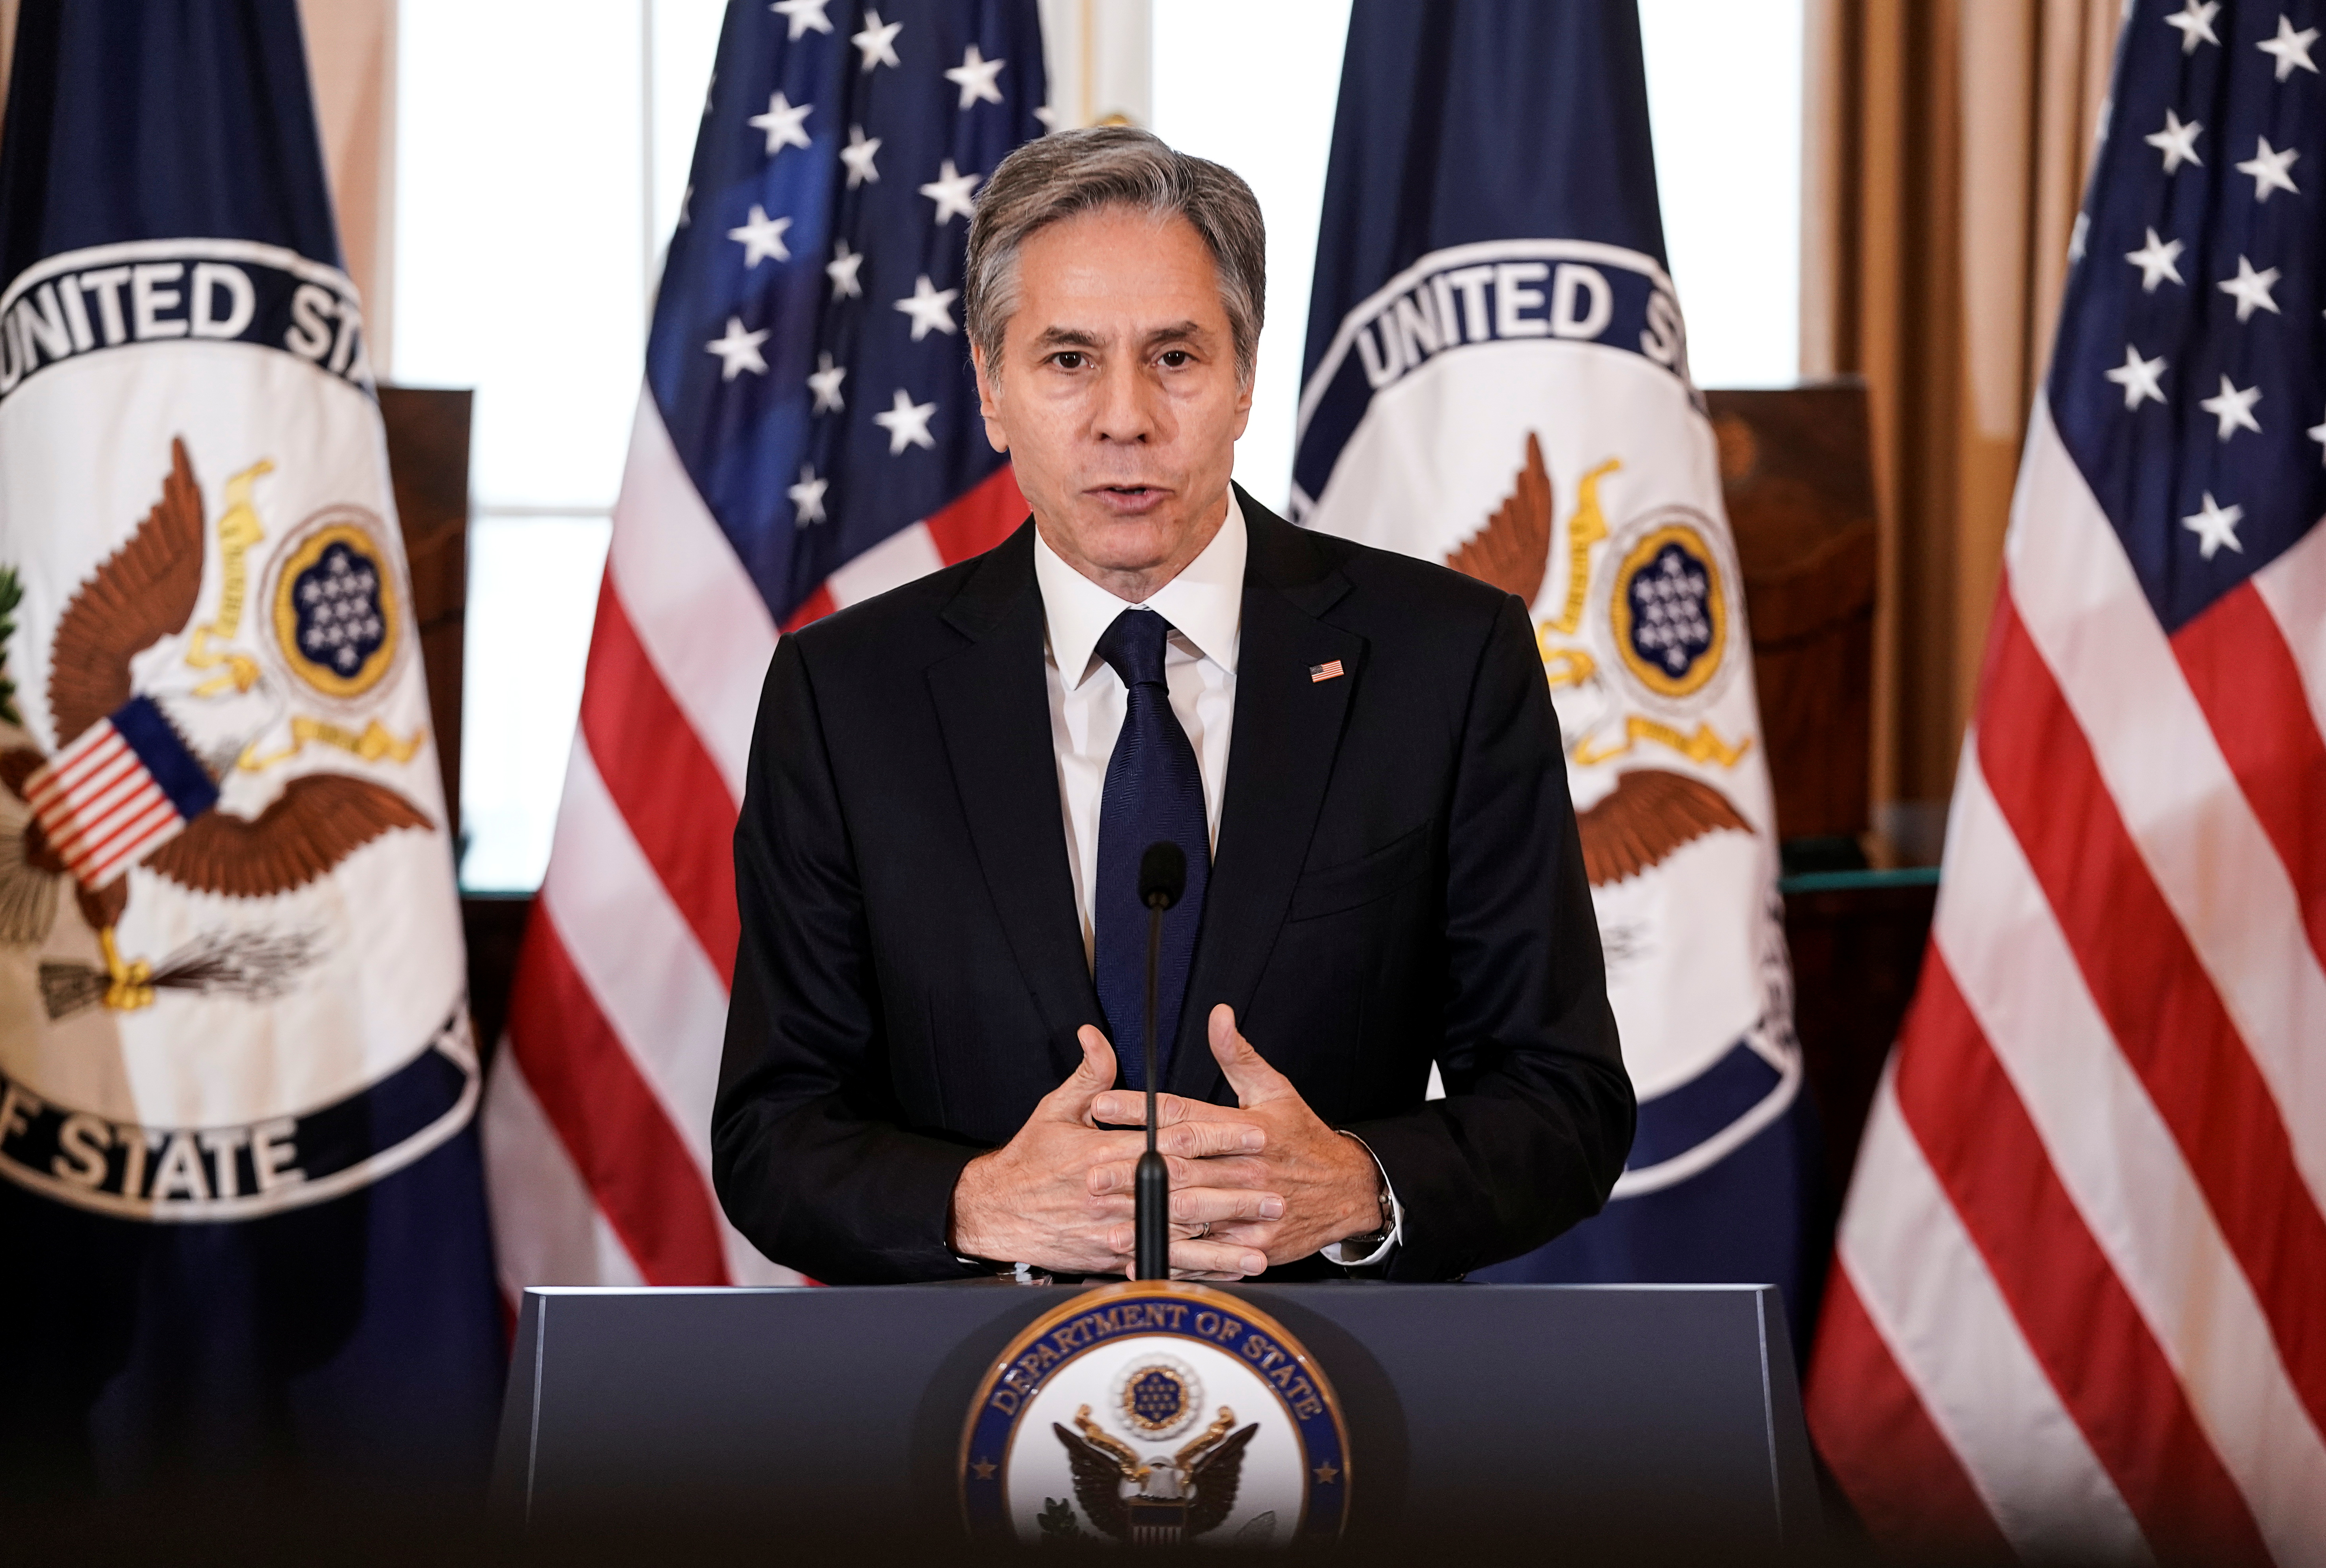 U.S. Secretary of State Blinken speaks about 2021 Trafficking in Persons Report at the State Department in Washington